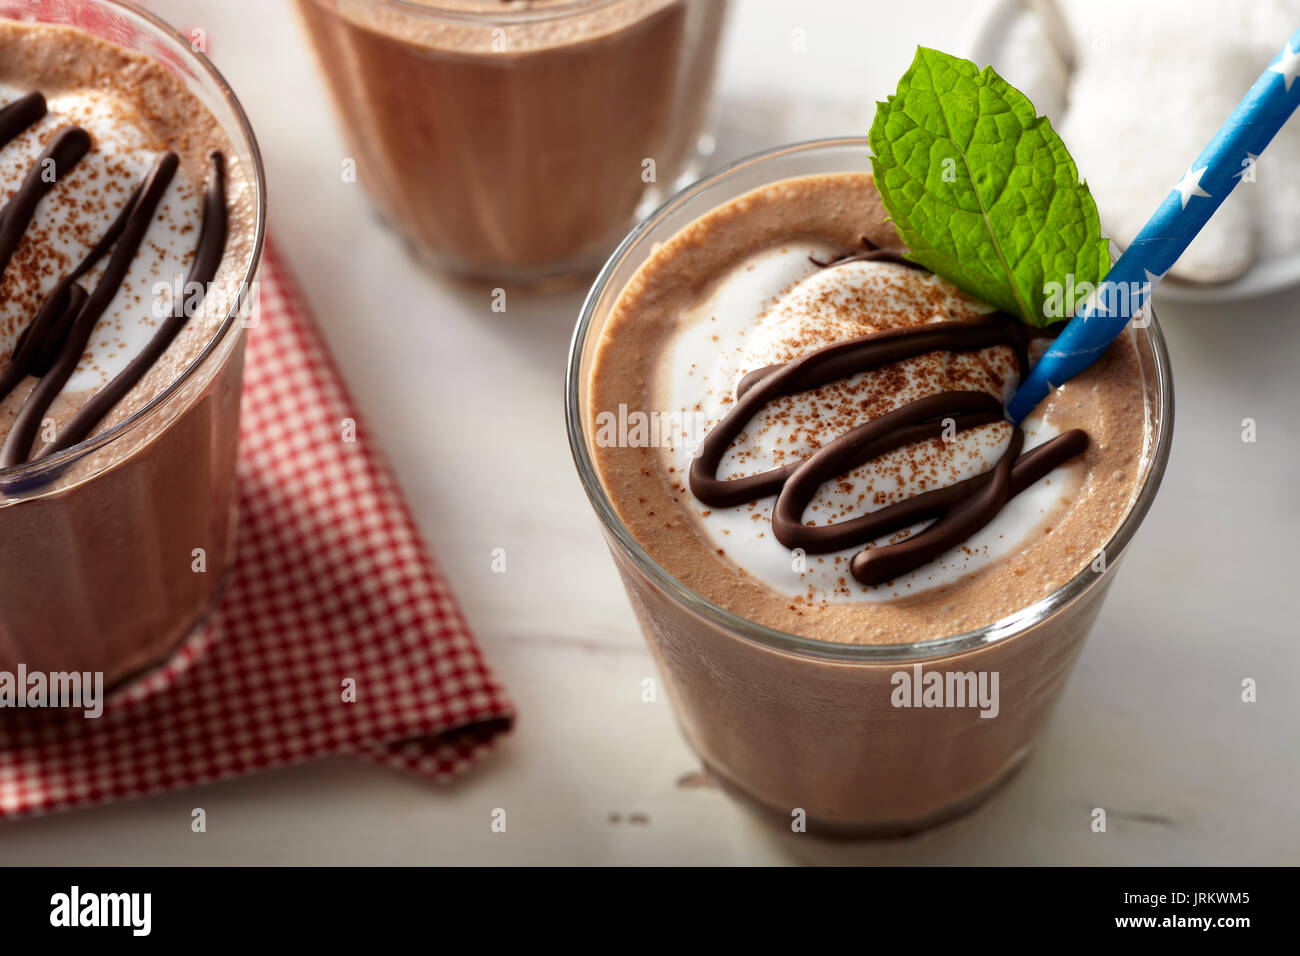 Chocolate mint coffee frappe Stock Photo